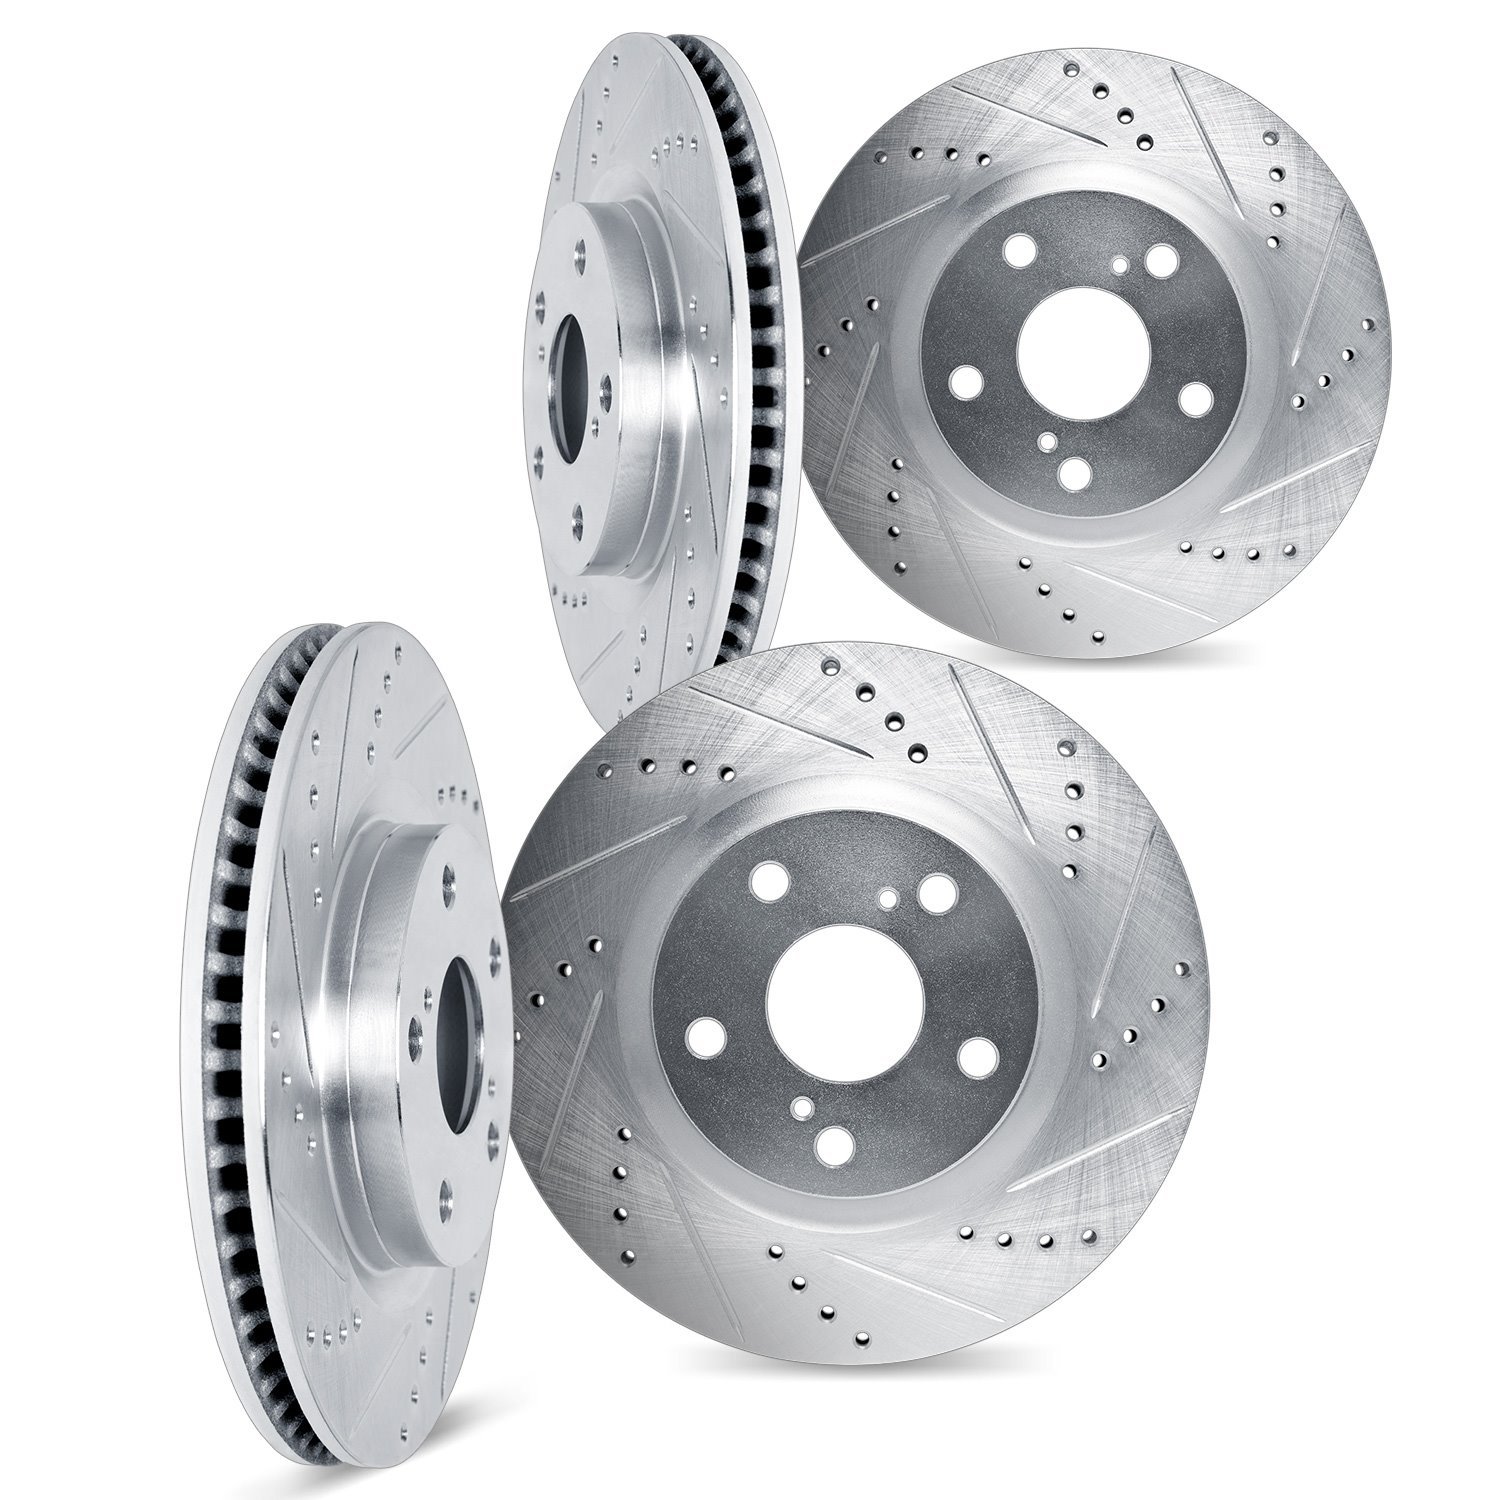 7004-67001 Drilled/Slotted Brake Rotors [Silver], Fits Select Infiniti/Nissan, Position: Front and Rear